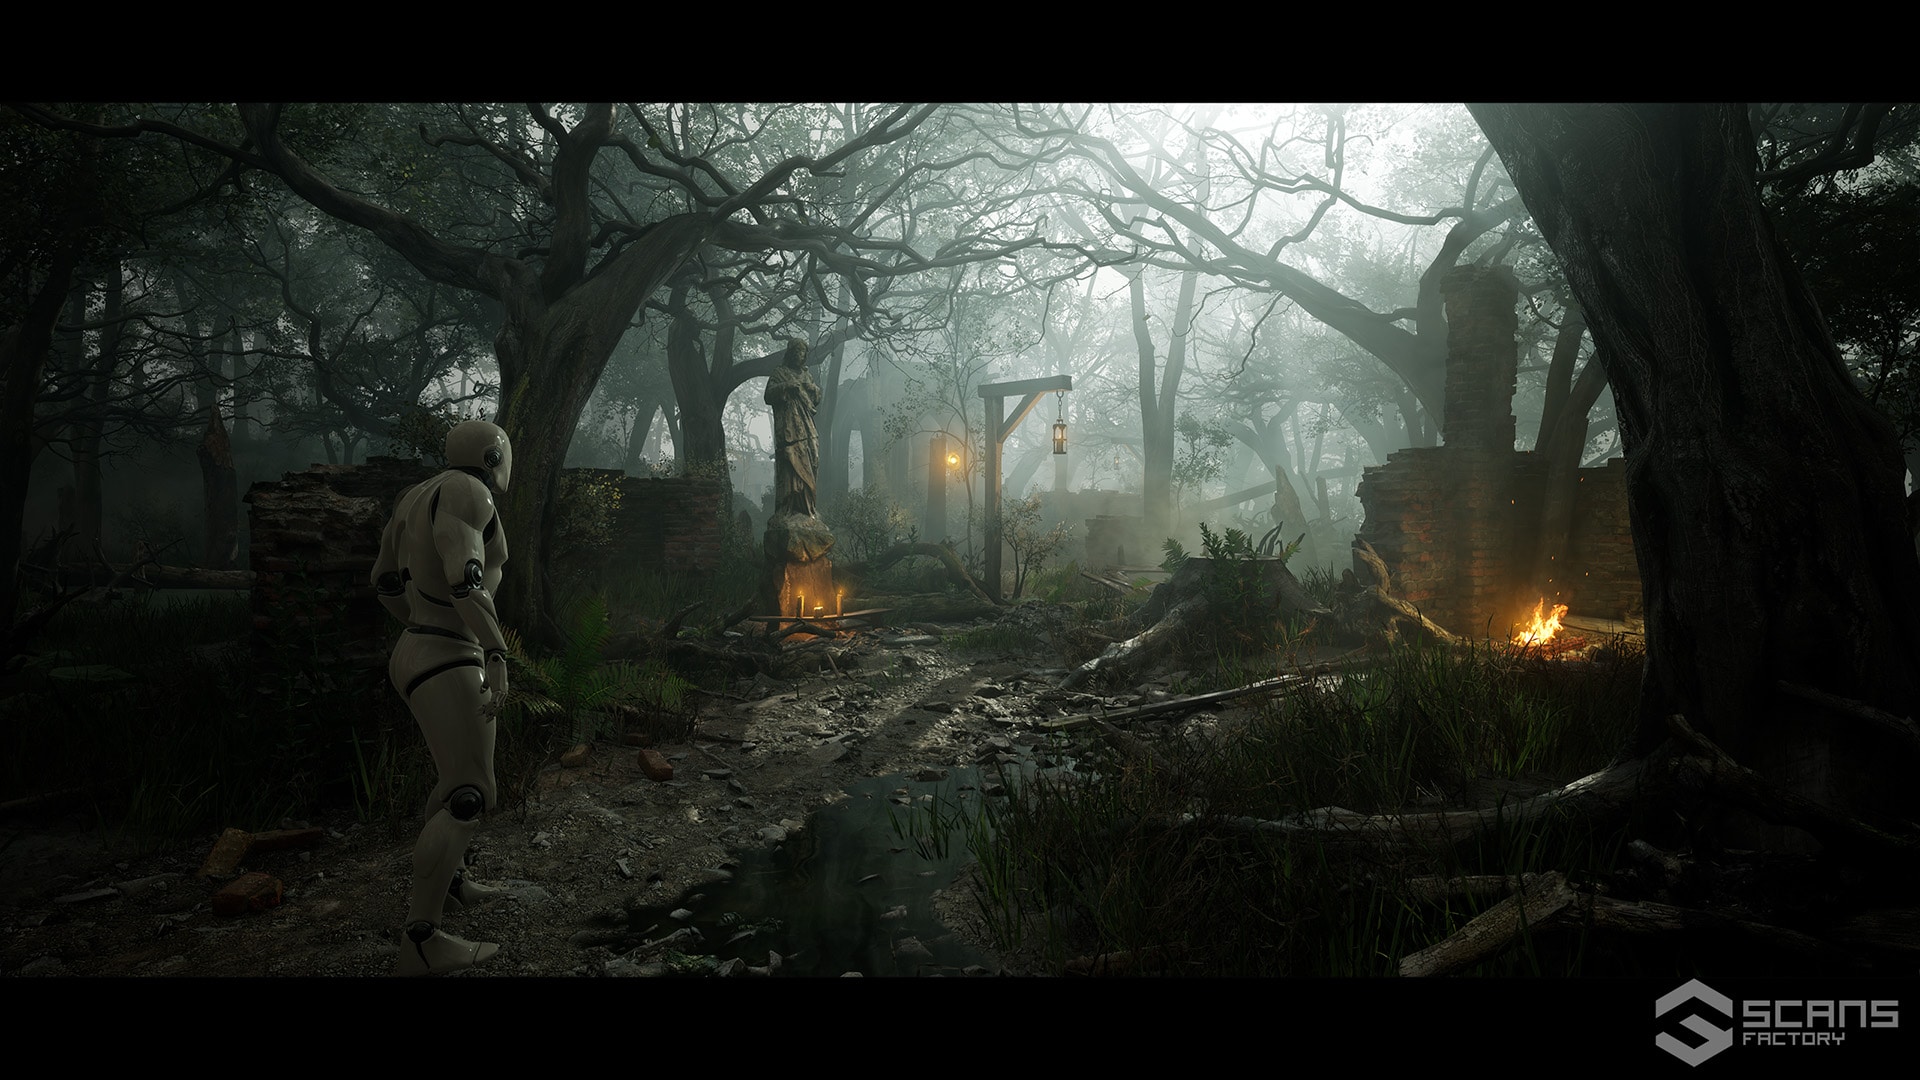 Soulstice's dark fantasy is fueled by Unreal Engine